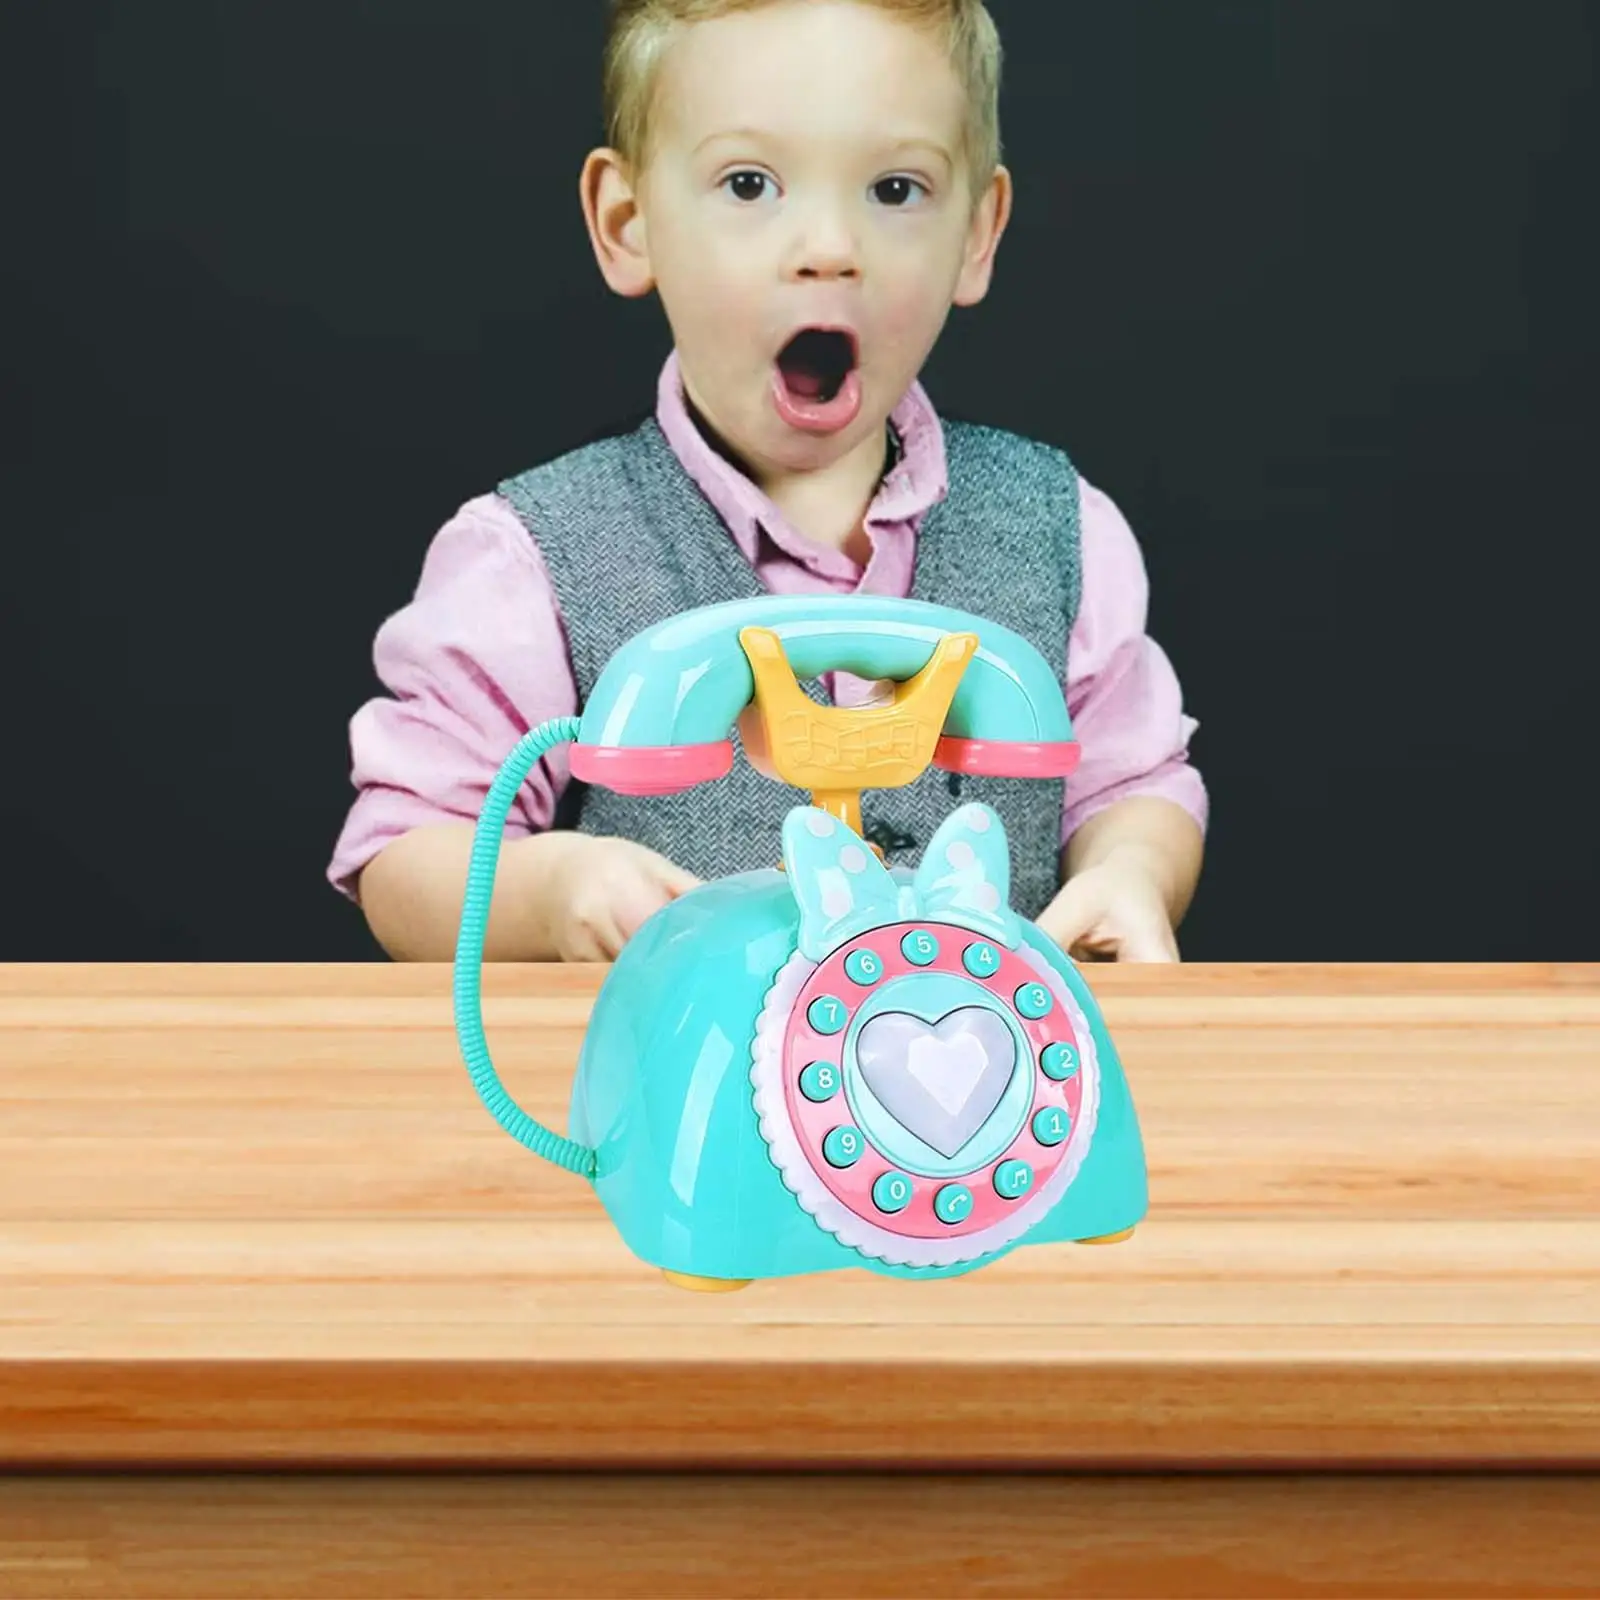 Retro Telephone Toy Educational Simulated Landline Development Develop Multifunction Baby Musical Toys for Kids 3+ Preschool